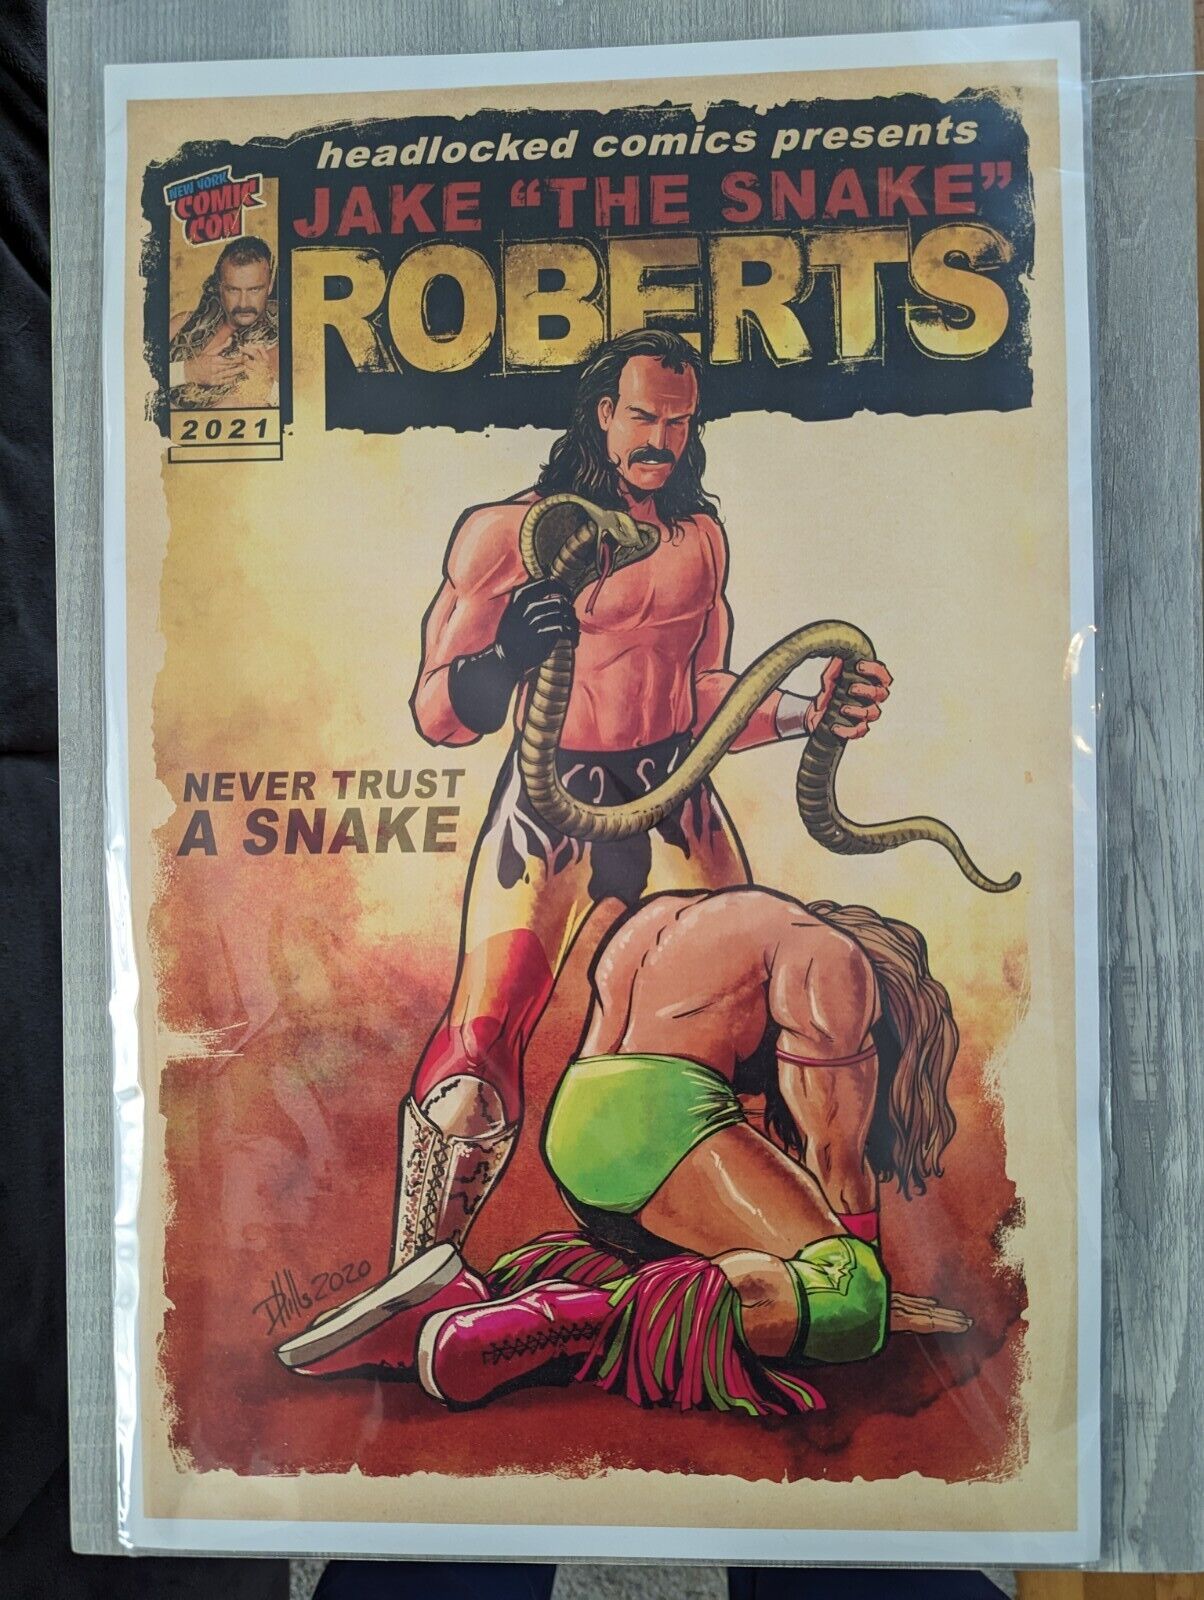 Jake The Snake Roberts - NY Comic Con 2021 Exclusive Poster - 11 x 17 - WWE WWF